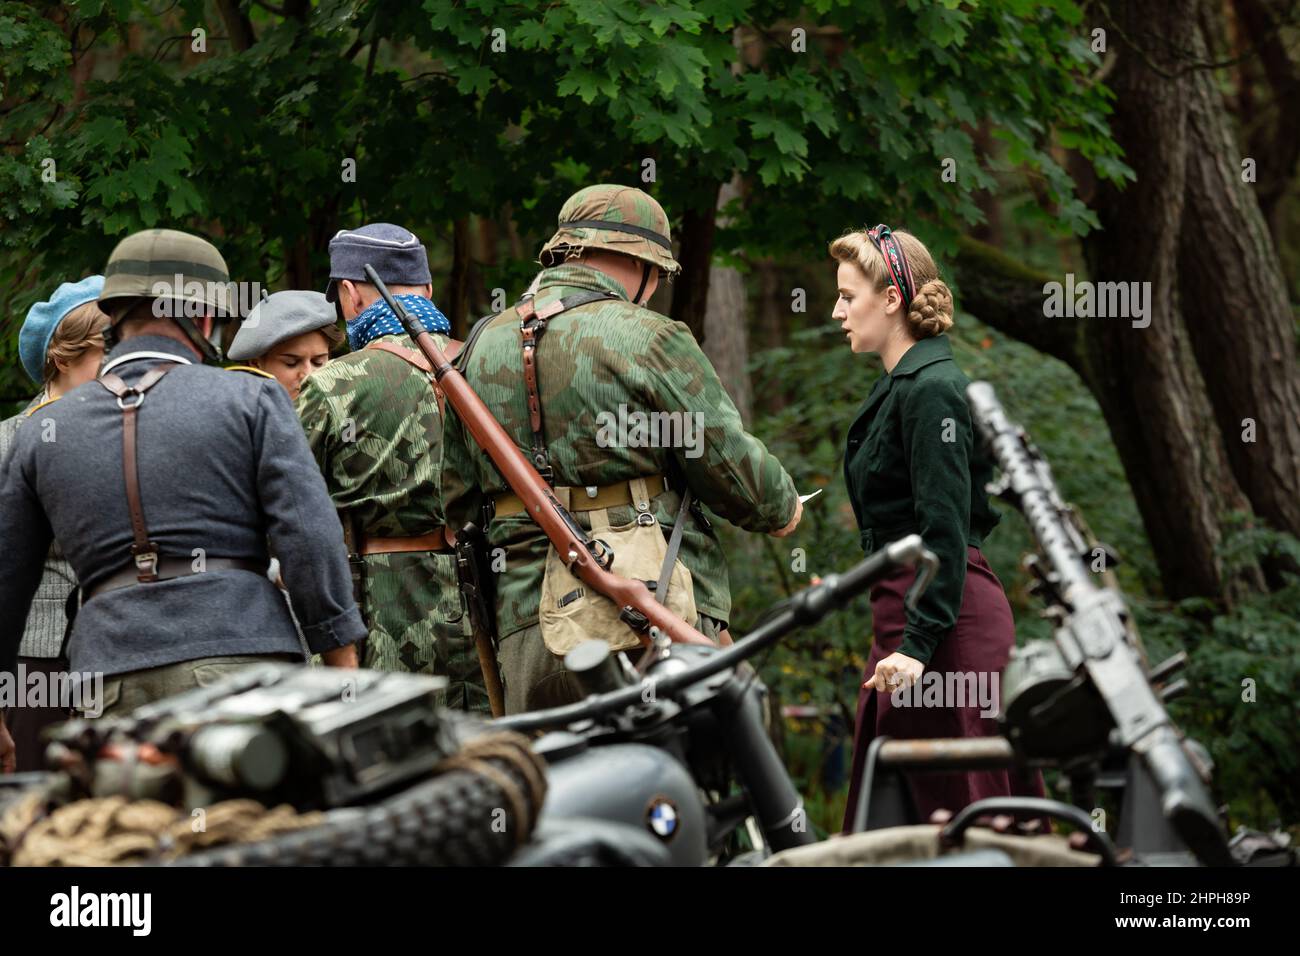 Hel, Pomerania, Poland- August 27, 2021: Historical reconstruction.  Second World War. France, German occupation.  German wehrmacht soldiers checking Stock Photo